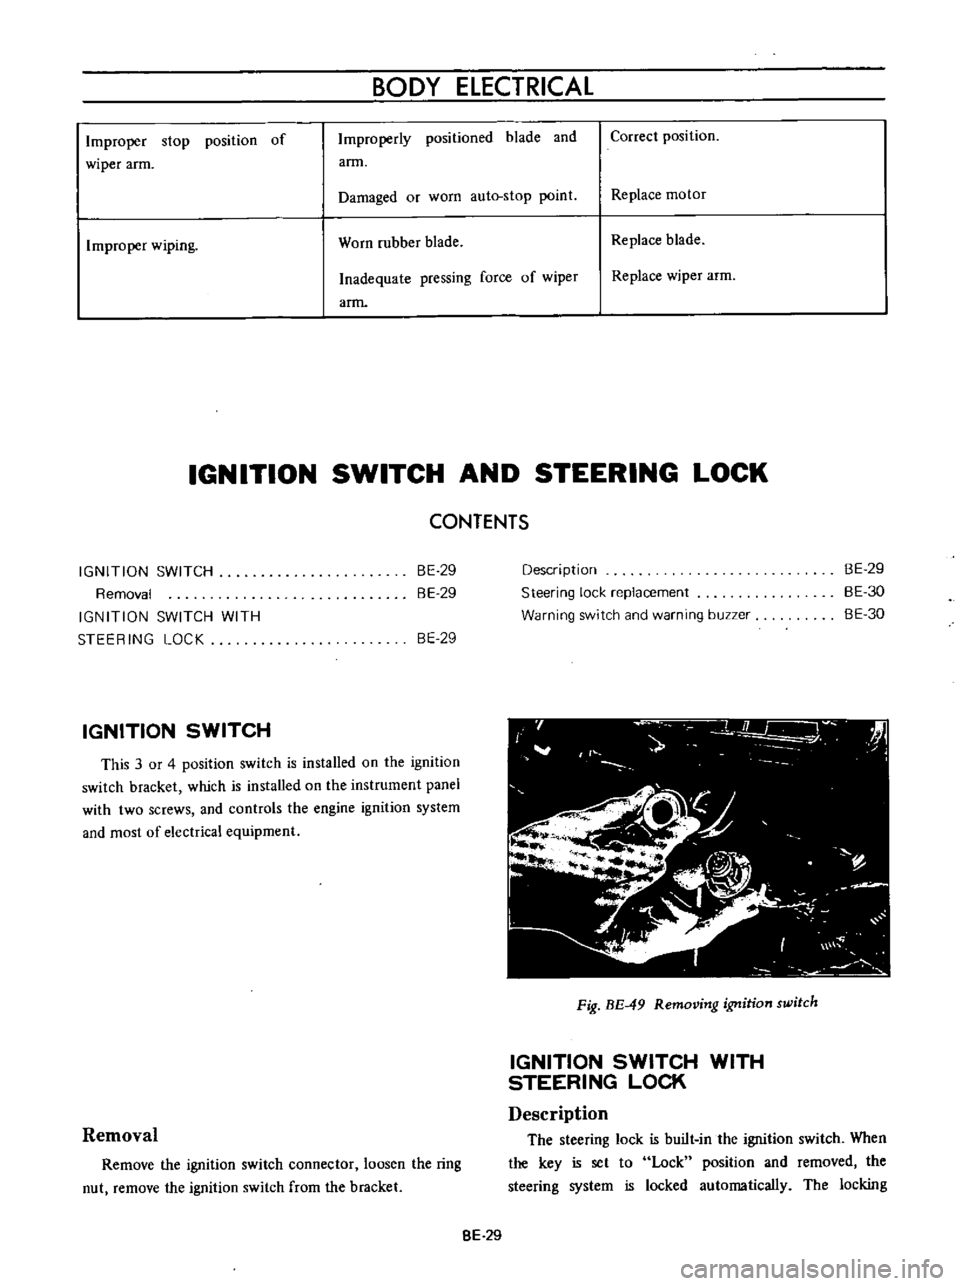 DATSUN B110 1973  Service Repair Manual 
BODY 
ELECTRICAL

Improper 
stop 
position 
of

wiper 
arm 
Improperly 
positioned 
blade 
and

arm 
Correct

position

Damaged 
or 
worn 
auto

stop 
point 
Replace 
motor

Improper 
wiping 
Worn

r